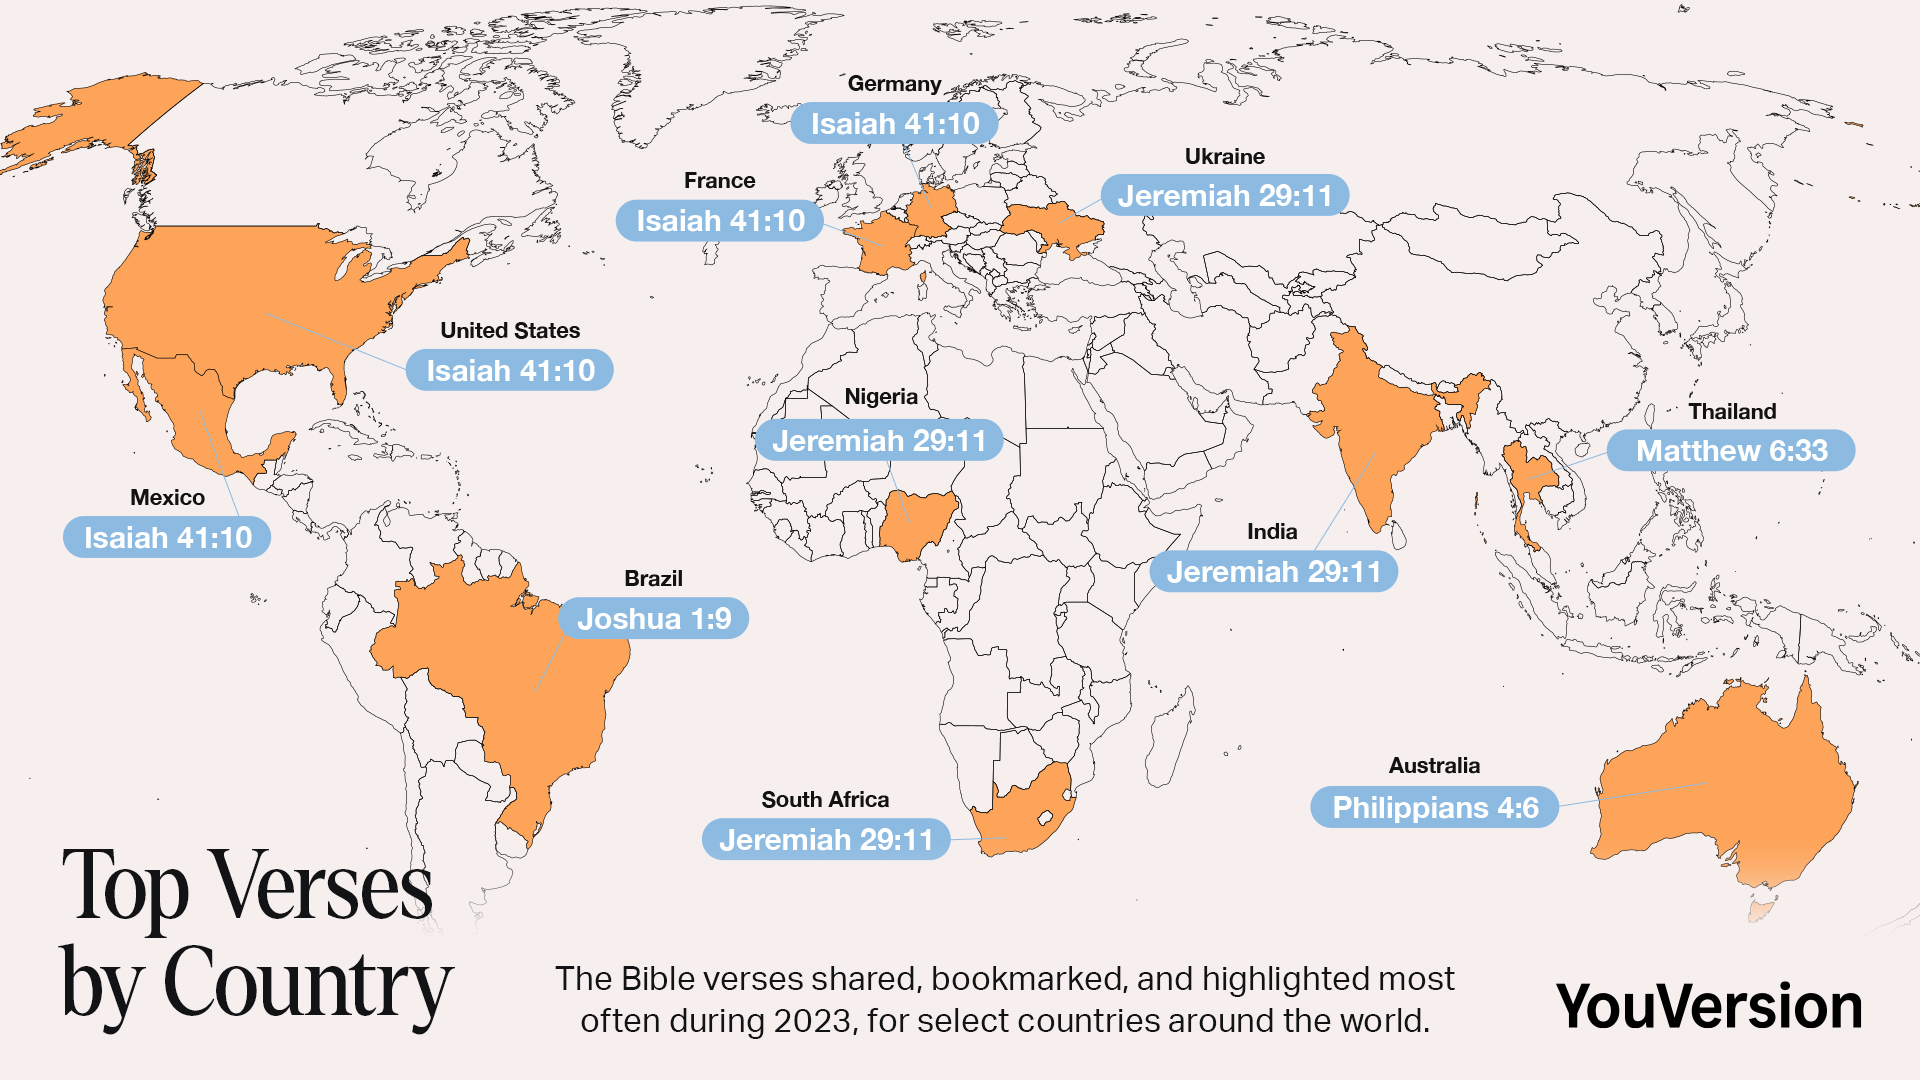 YouVersion works alongside more than 4,660 partners globally to provide Bible text and quality biblical content to people in as many languages as possible. 